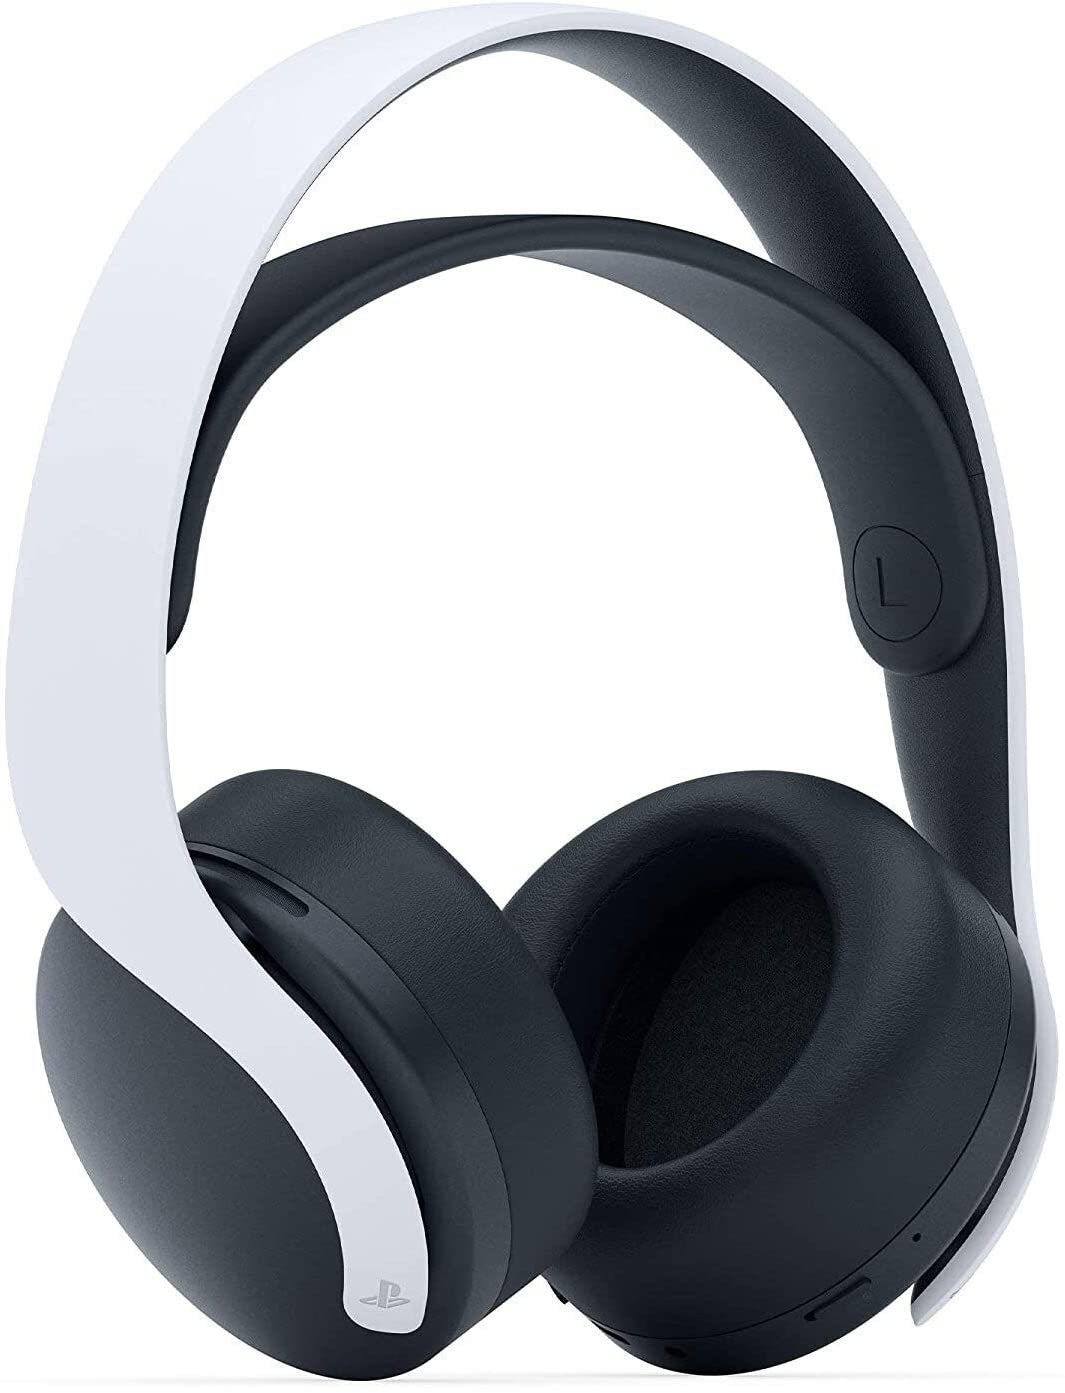 Sony Pulse 3D Wireless Headset for PlayStation 5 &amp; PlayStation 4 - White (Refurbished)